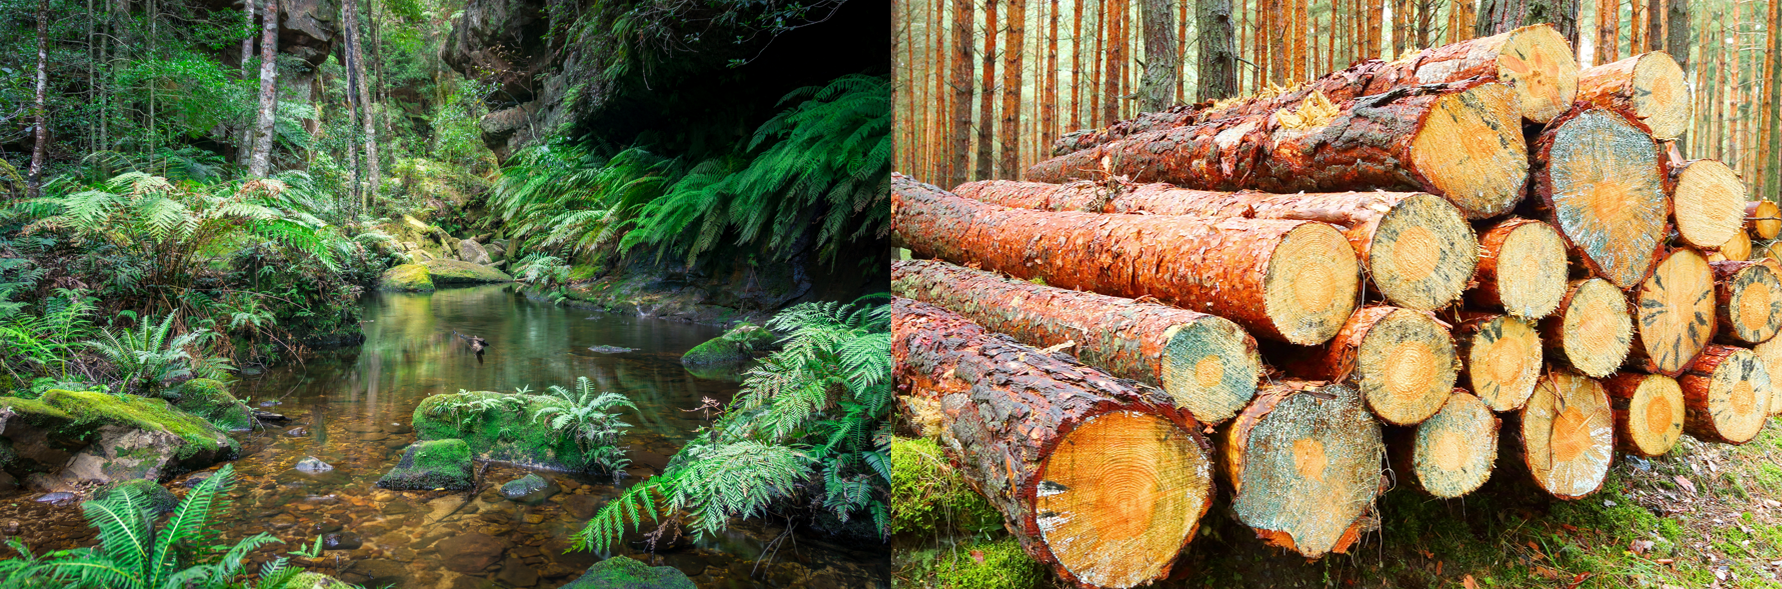 Images of a lush forest floor with standing water and pile of harvested timber logs stacked up for processing.